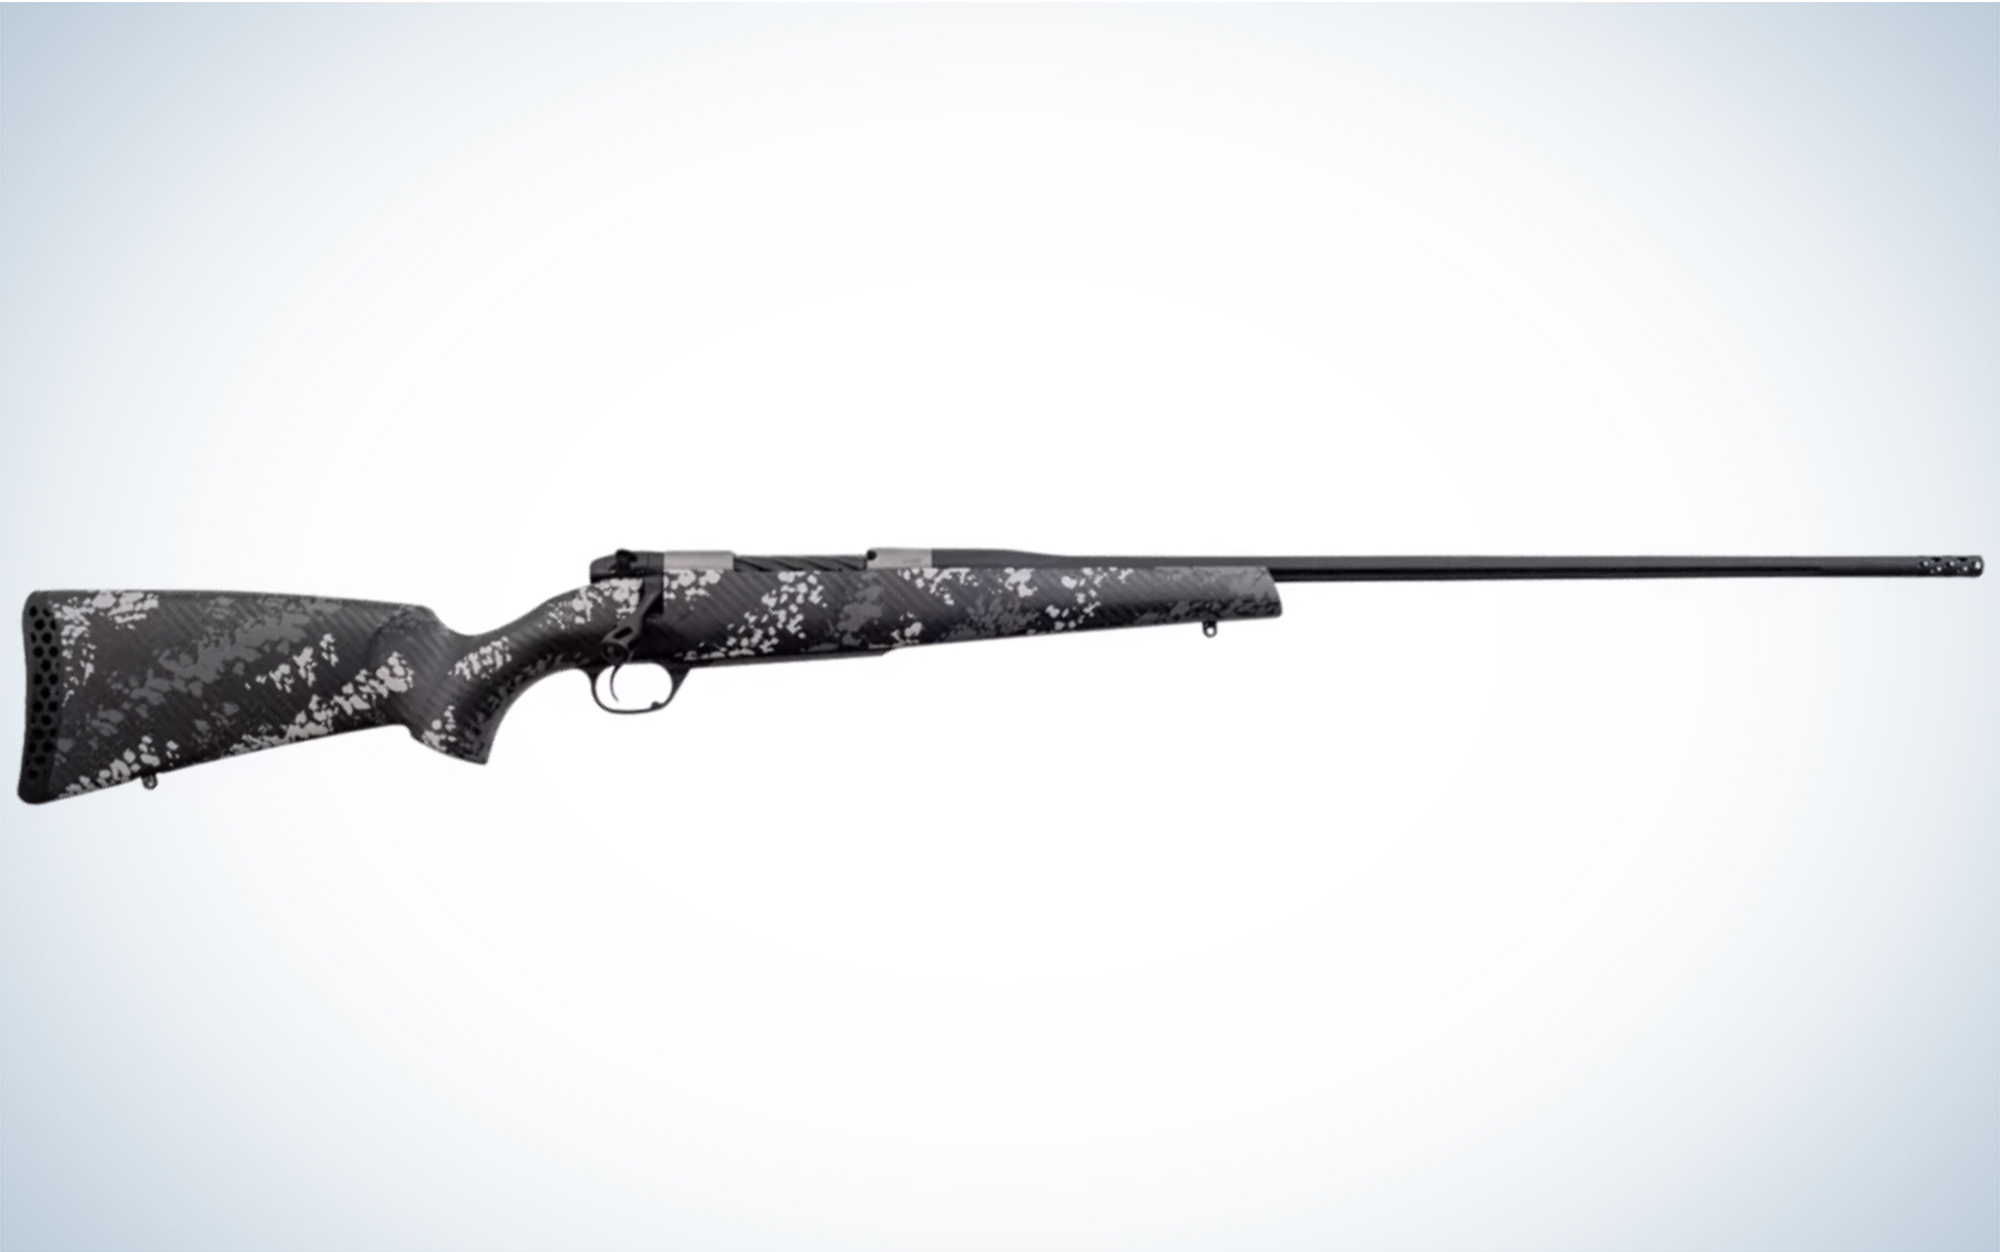 The Mark V Backcountry Ti is one of the best mountain rifles.